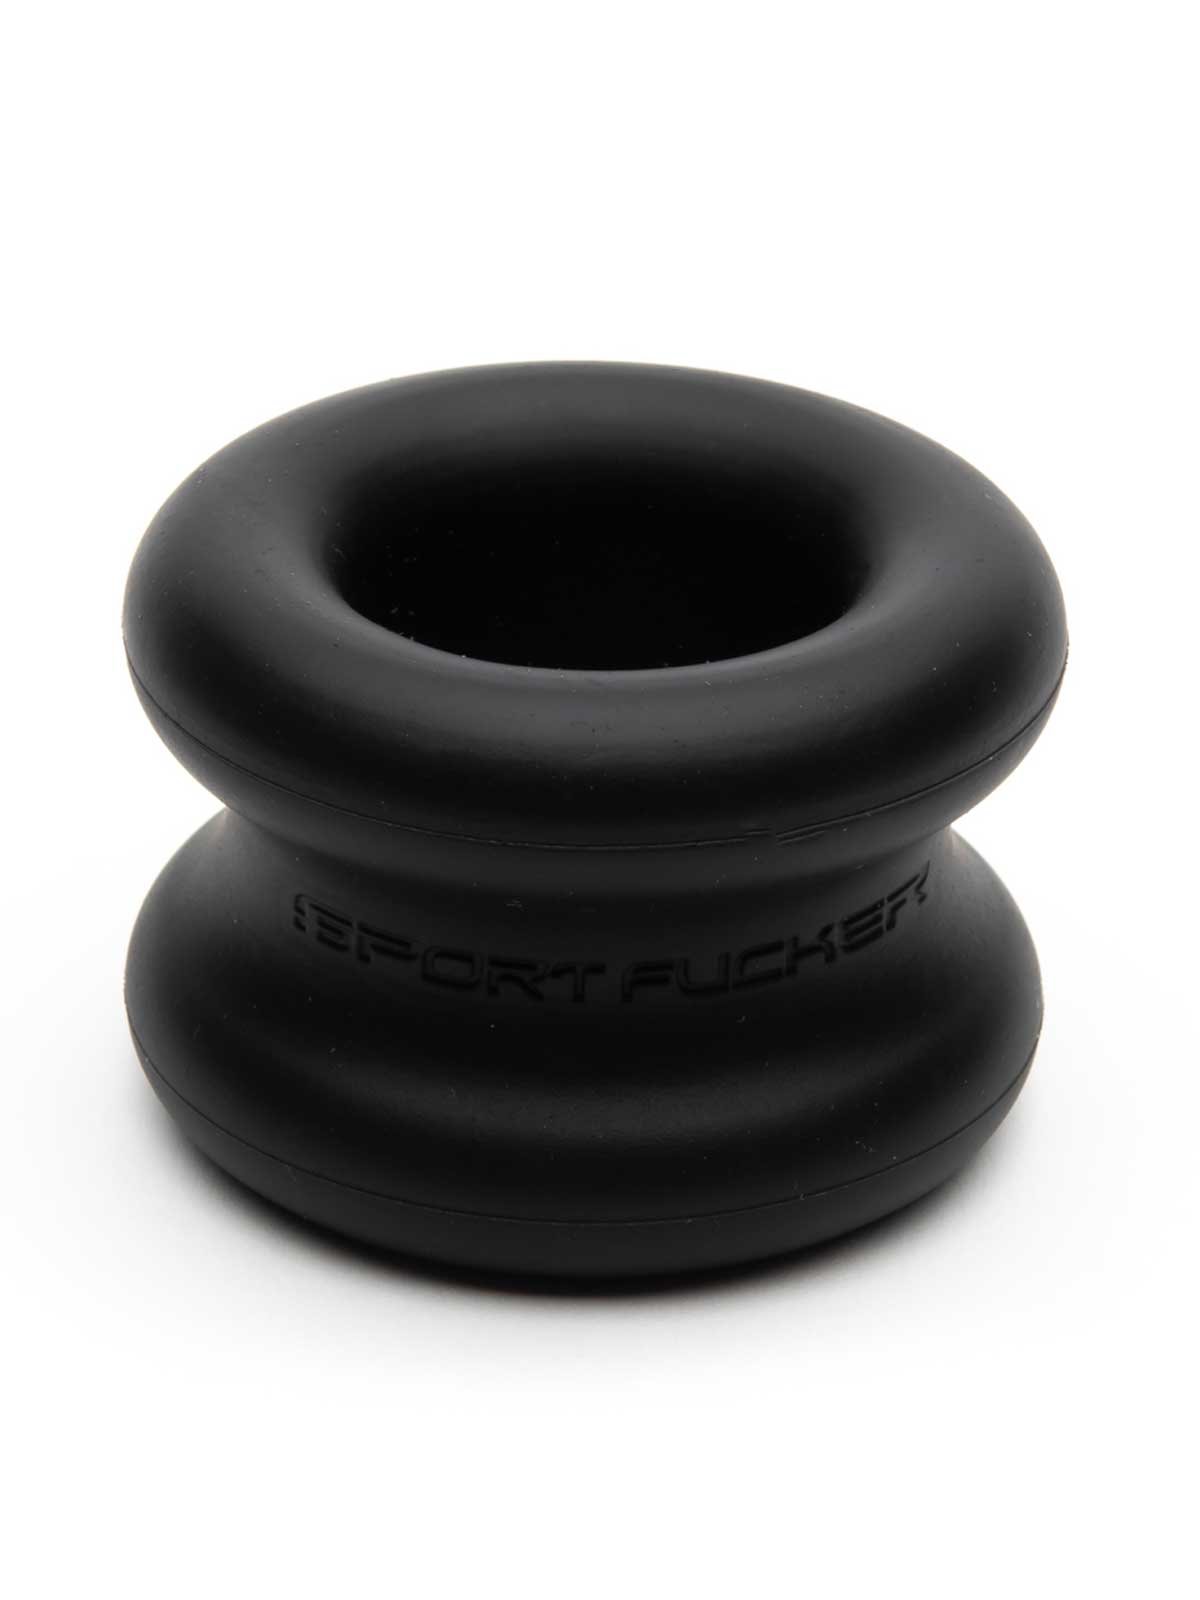  Muscle Ball Stretcher | Black